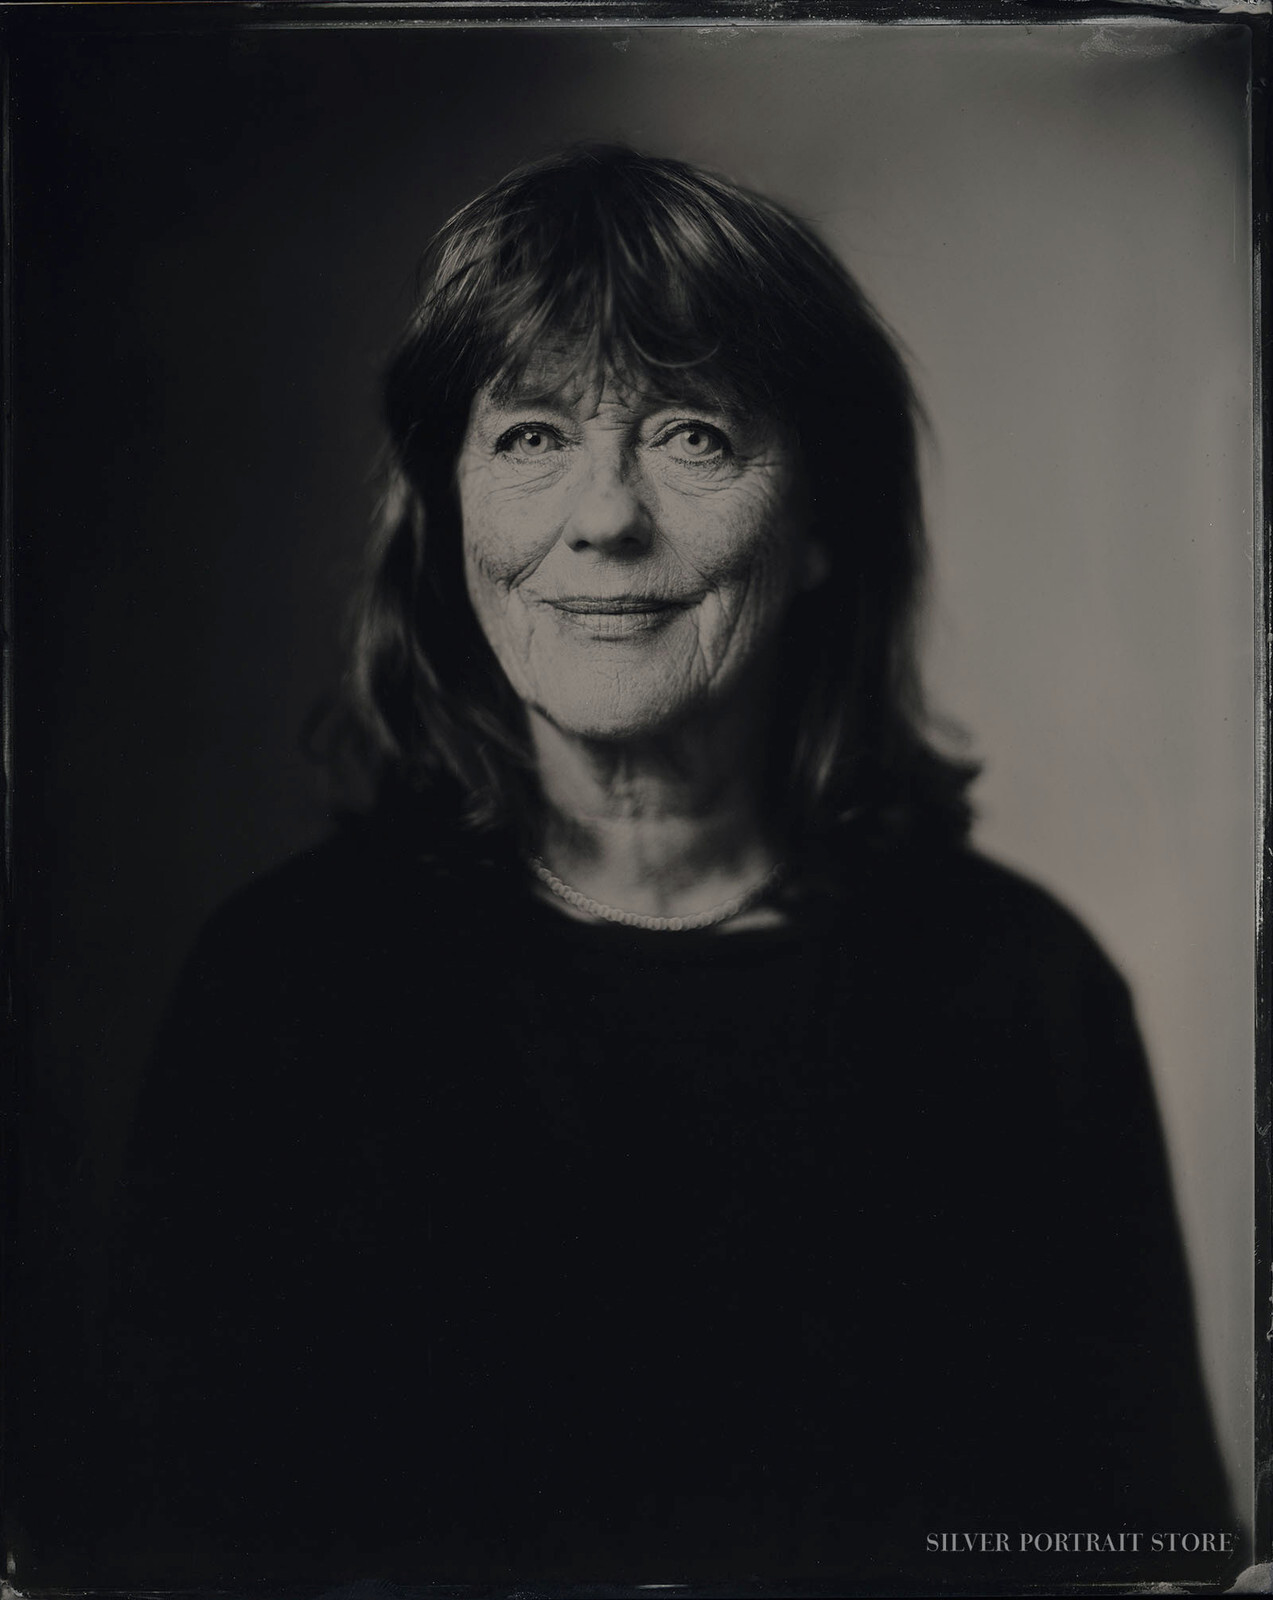 Jeannette-Silver Portrait Store-scan from Wet plate collodion-Tintype 20 x 25 cm.